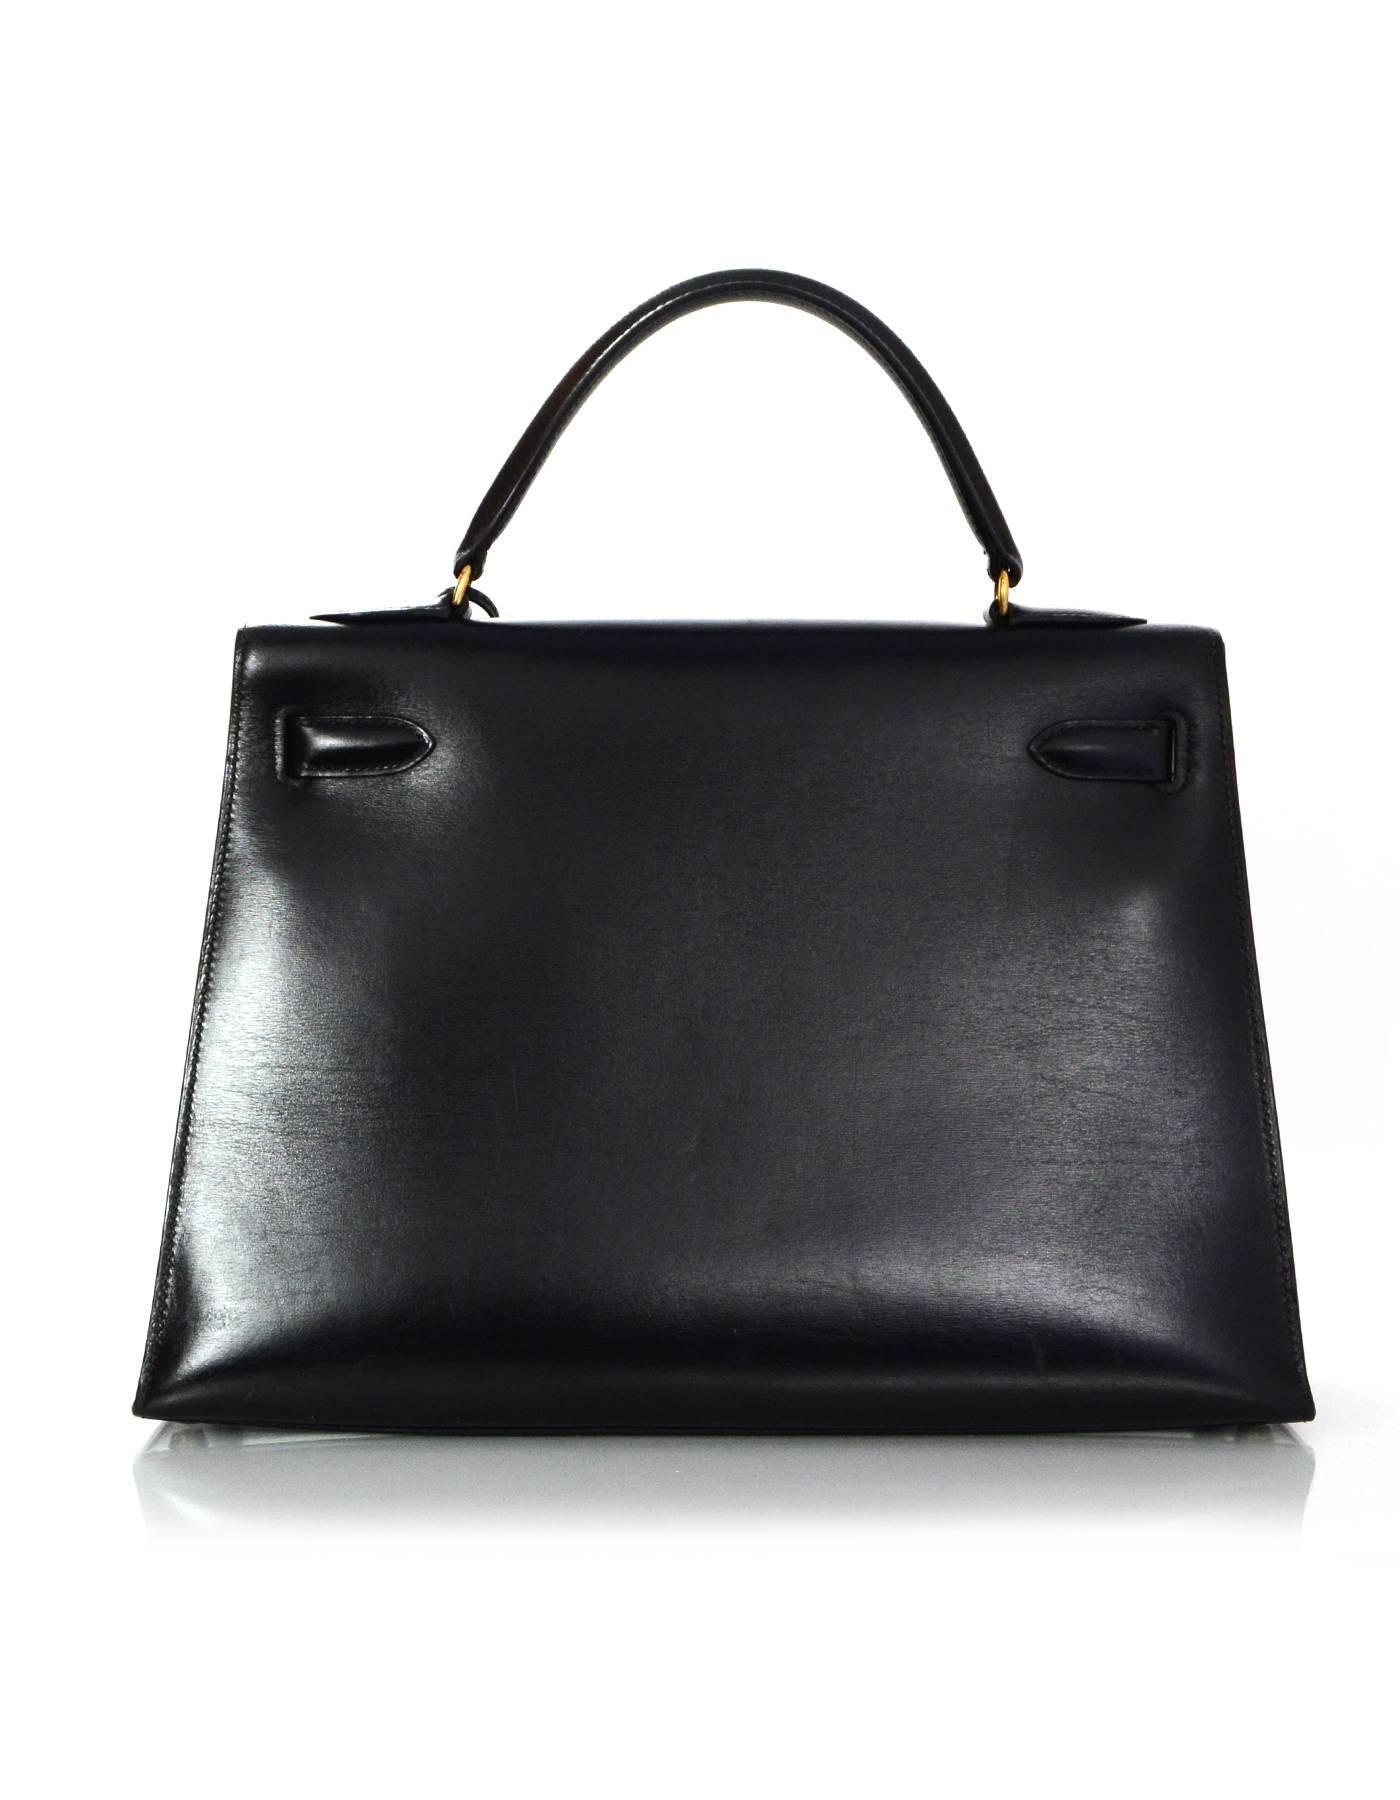 100% Authentic Hermes '80s Black Box Leather 32cm Sellier Rigid Kelly Bag.  Features removable shoulder strap.

Made In: France
Year of Production: 1987
Color: Black
Hardware: Goldtone
Materials: Smooth box leather, metal
Lining: Black chevre